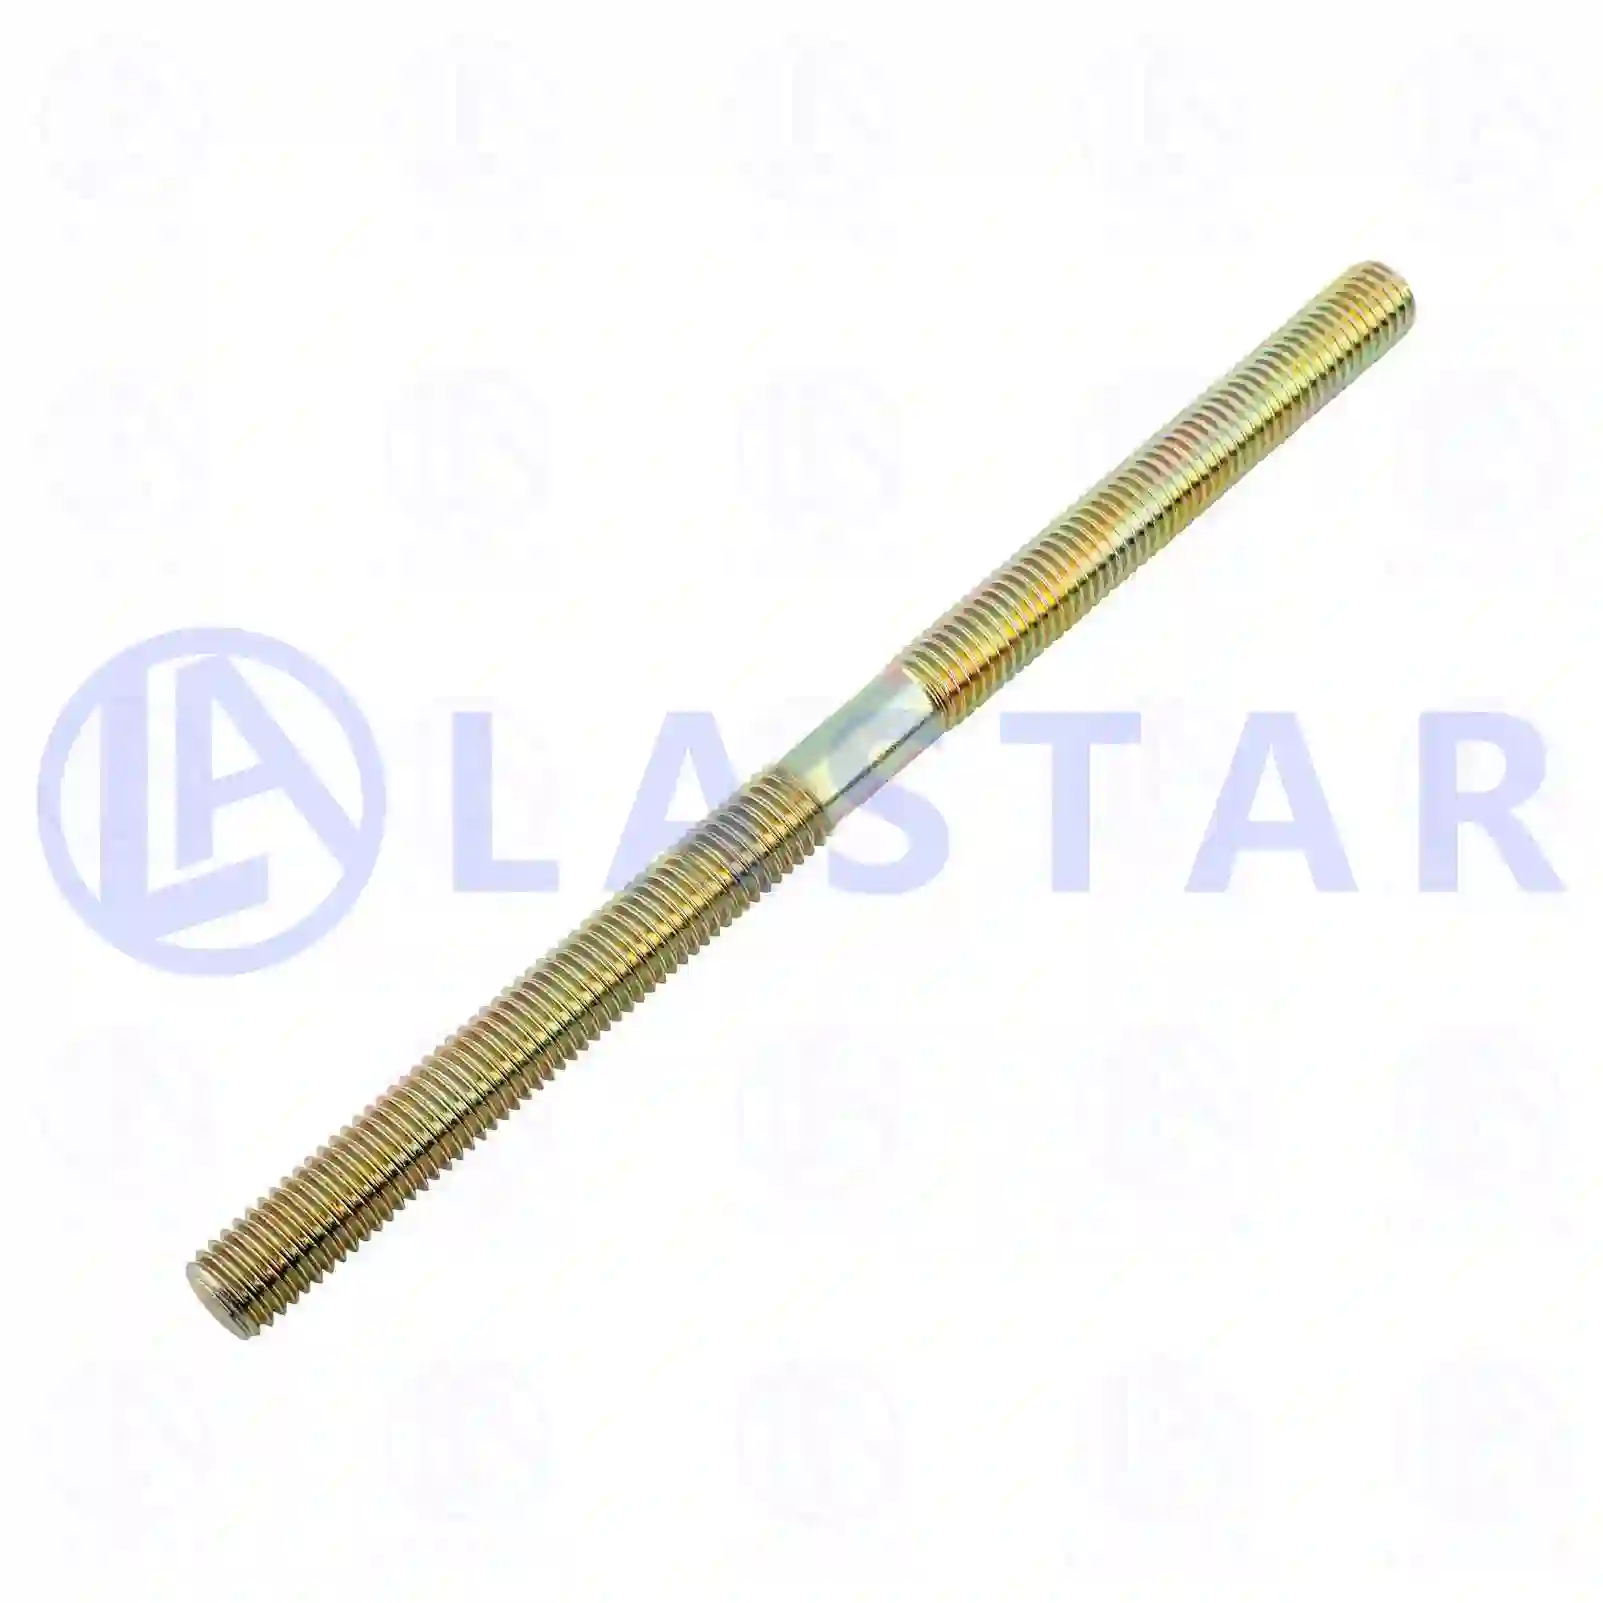  Threaded rod || Lastar Spare Part | Truck Spare Parts, Auotomotive Spare Parts